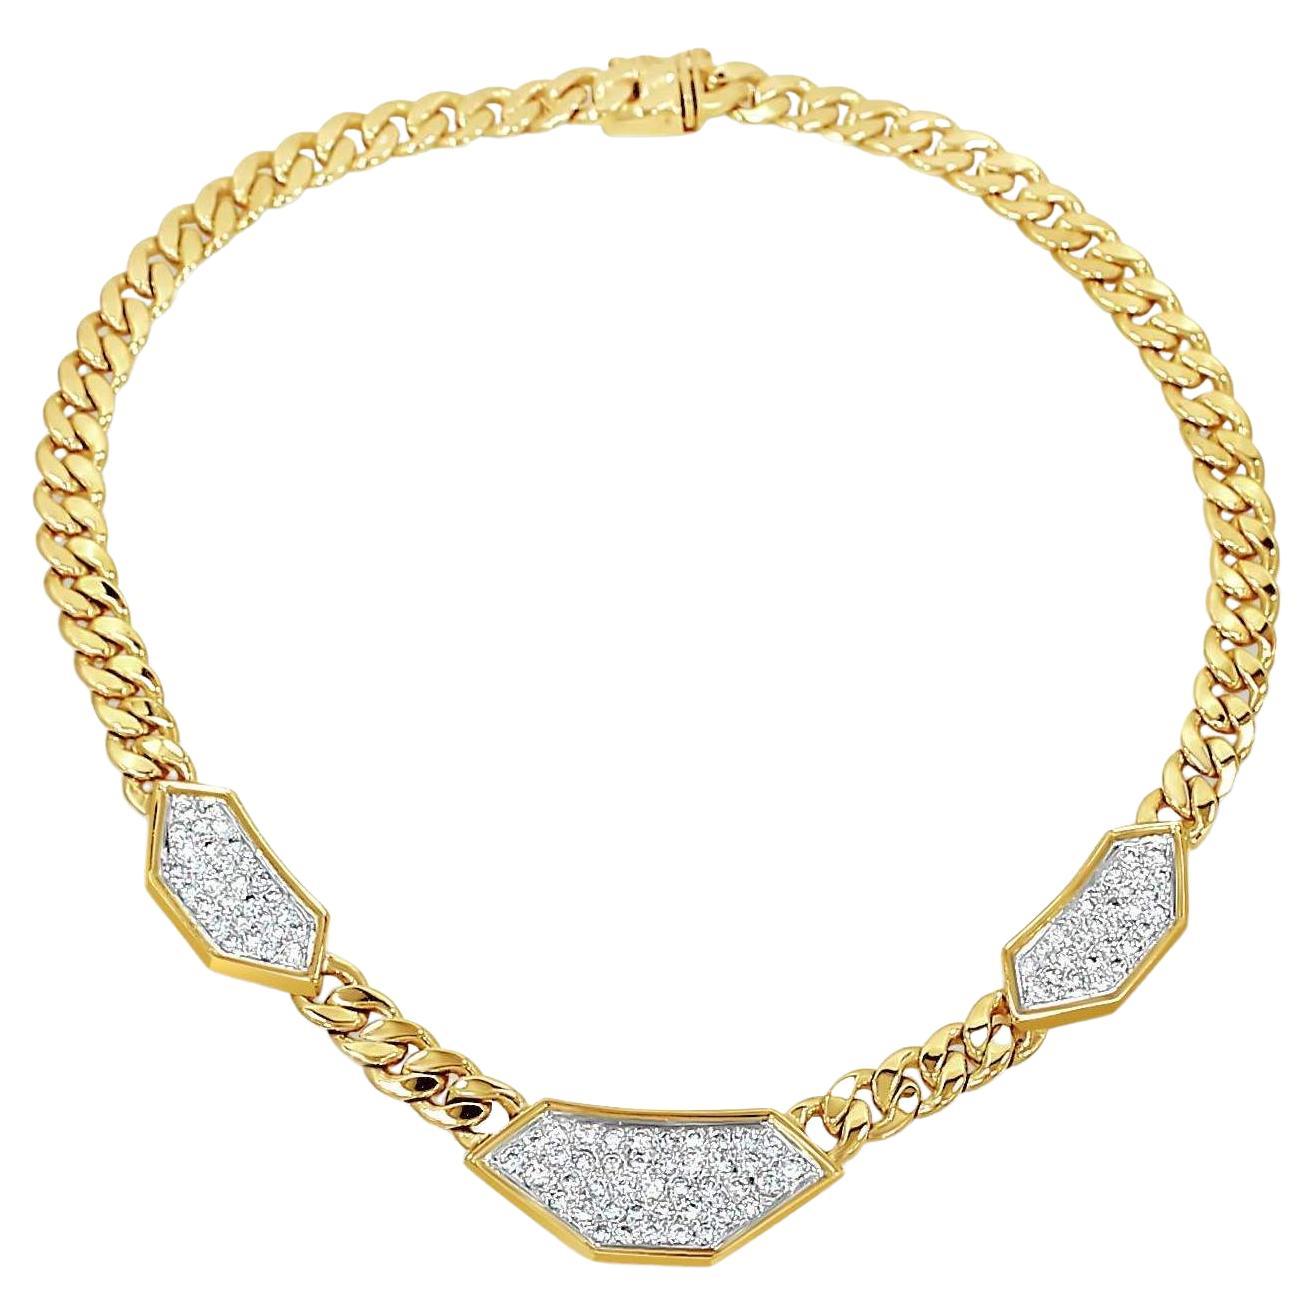 Hammerman Brothers Diamond Necklace with 102 Pave Diamonds 3.00 CTW in 14K YG